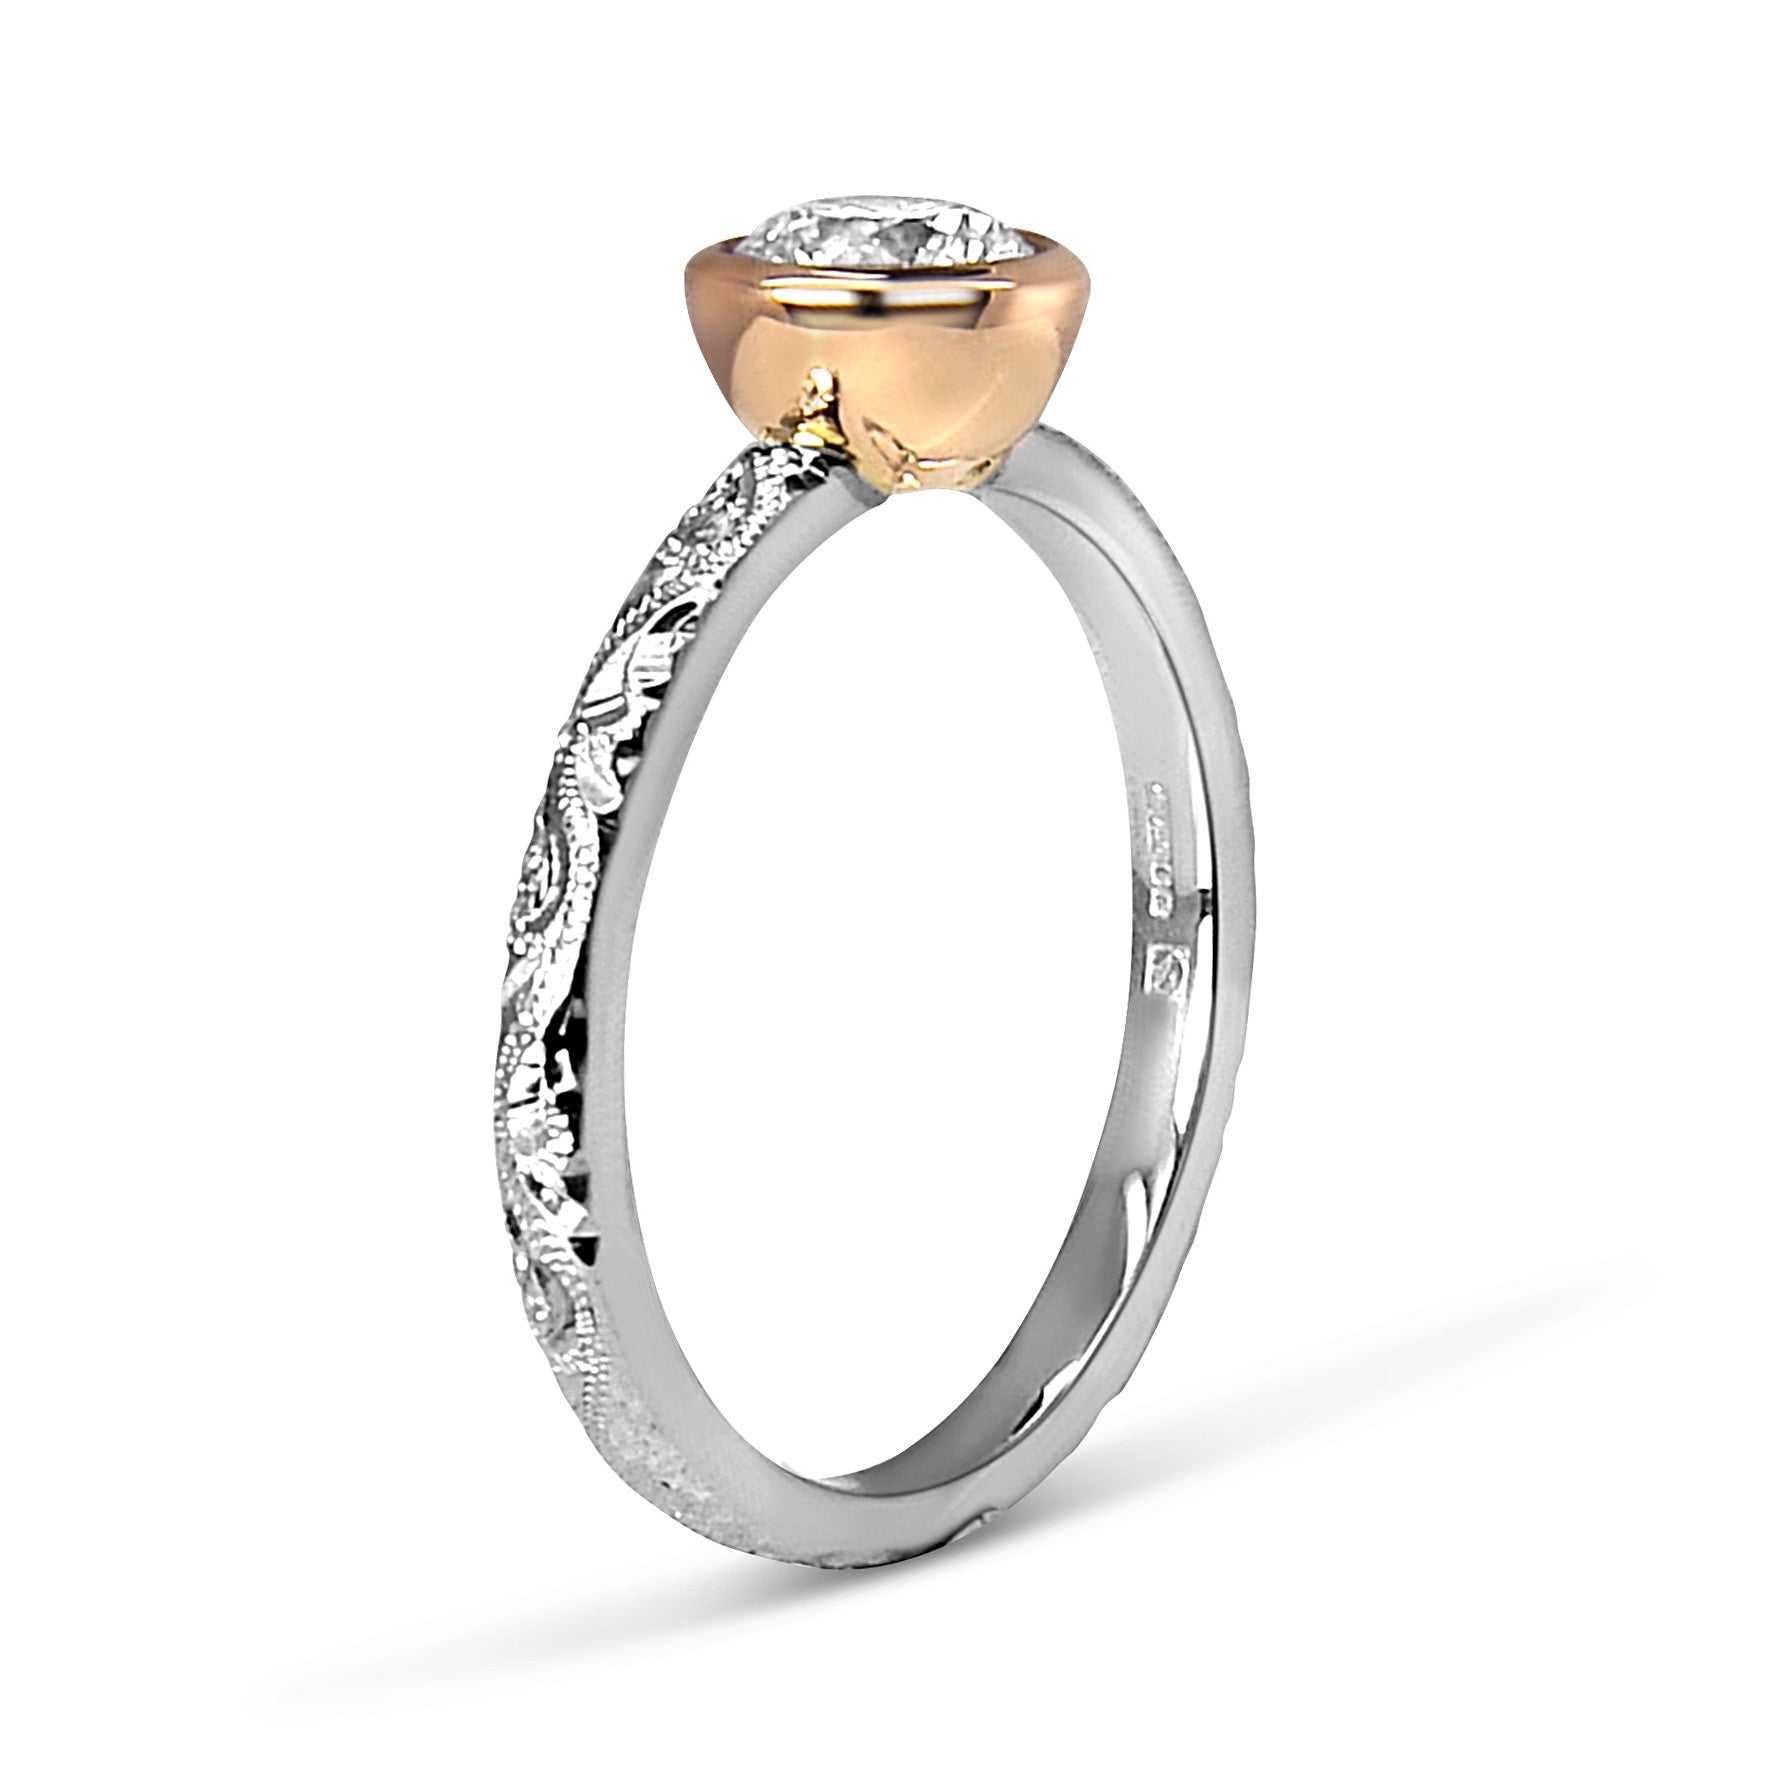 Bespoke Max and Gemma engagement ring - white and rose Fairtrade Gold, hand-engraved Scrolls and a Canadian diamond